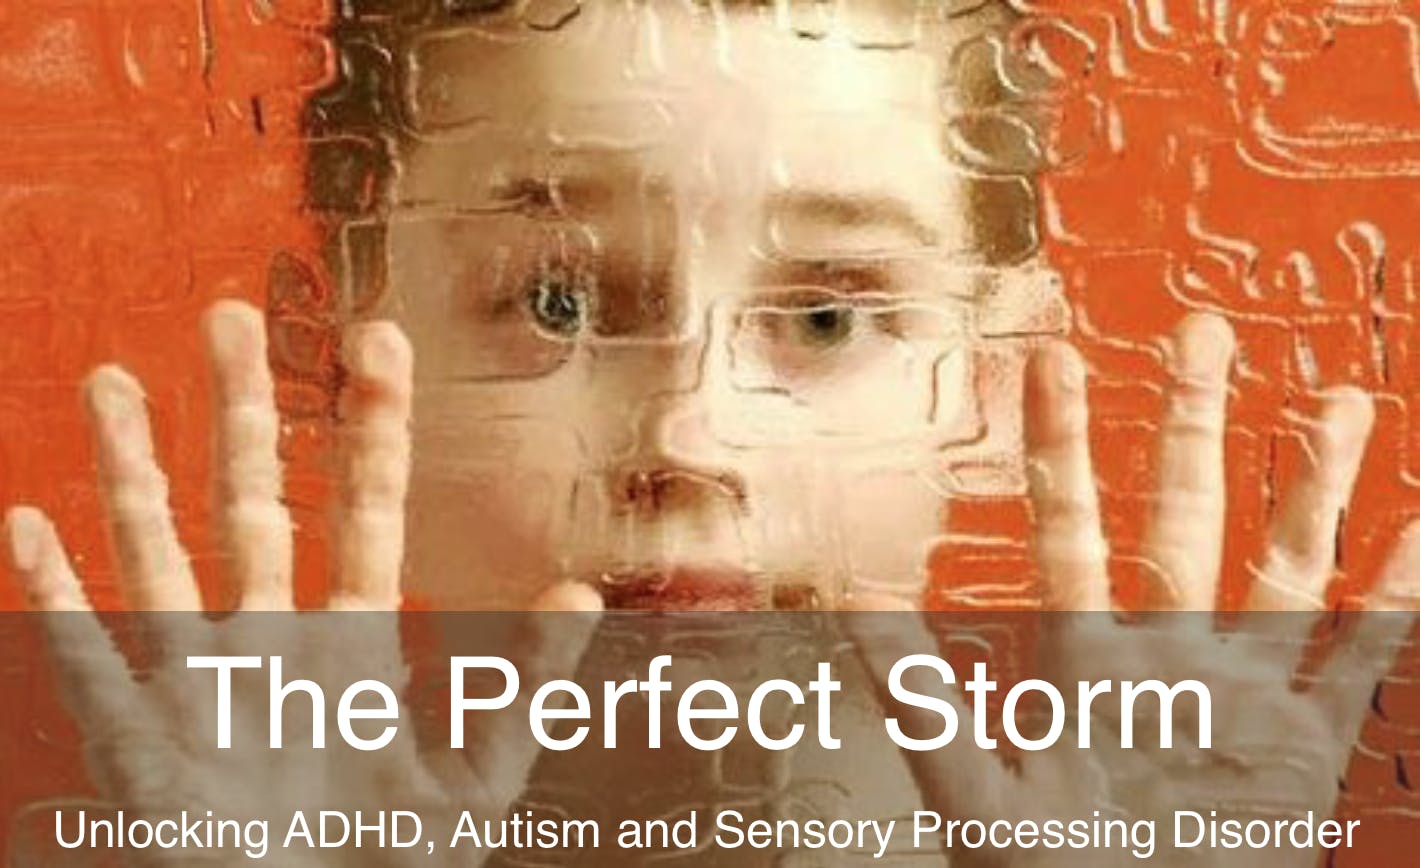 ADHD, Autism and Sensory Processing Workshop for Parents